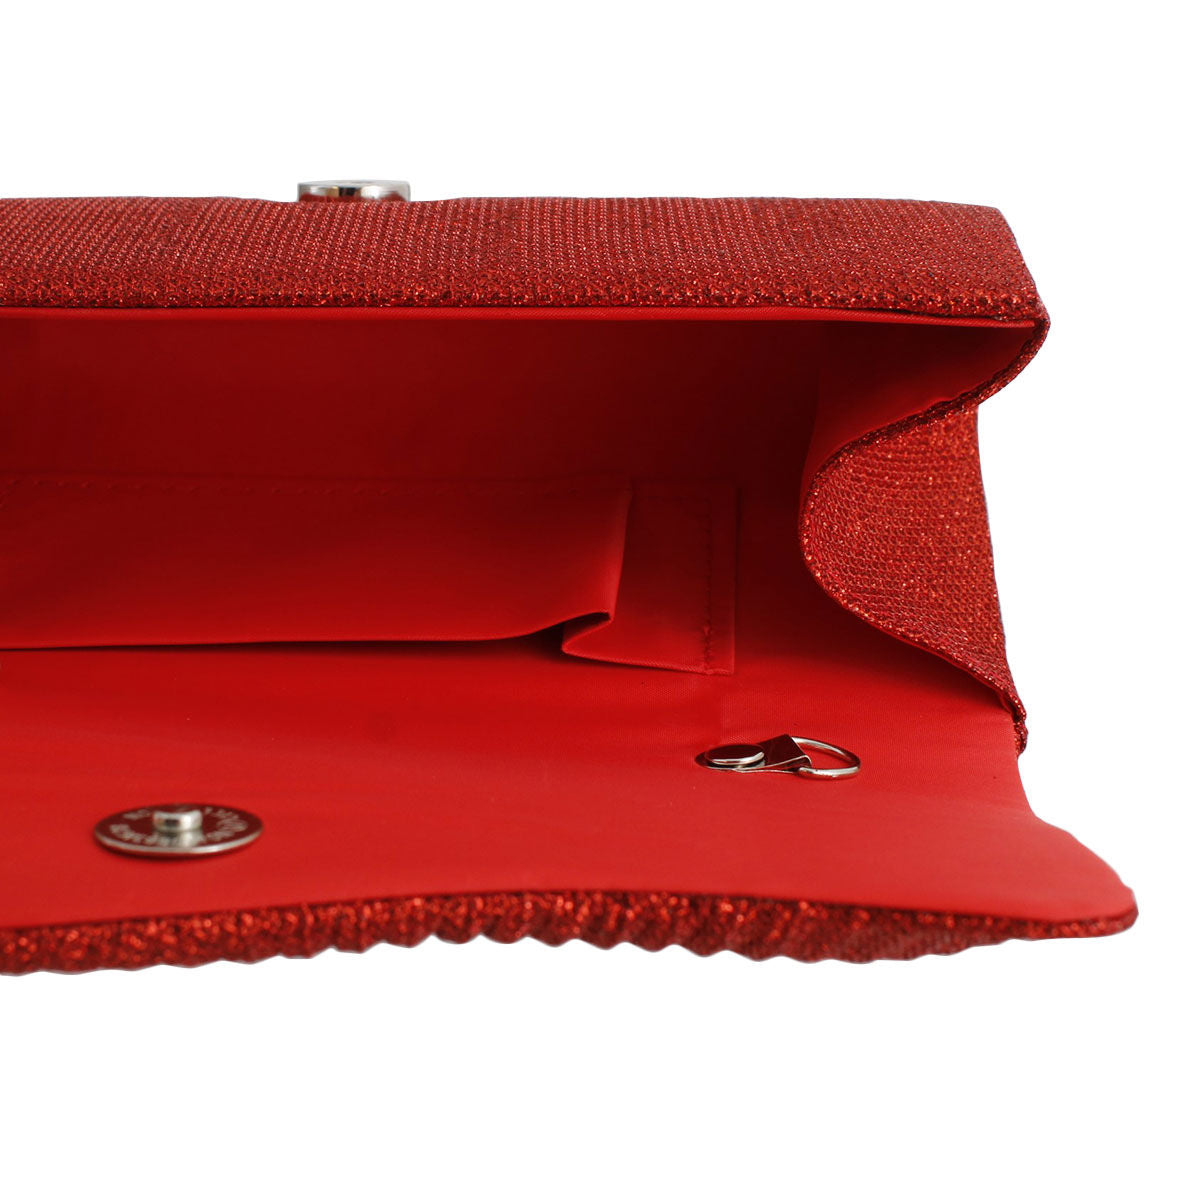 Clutch Red Ruched Evening Bag for Women